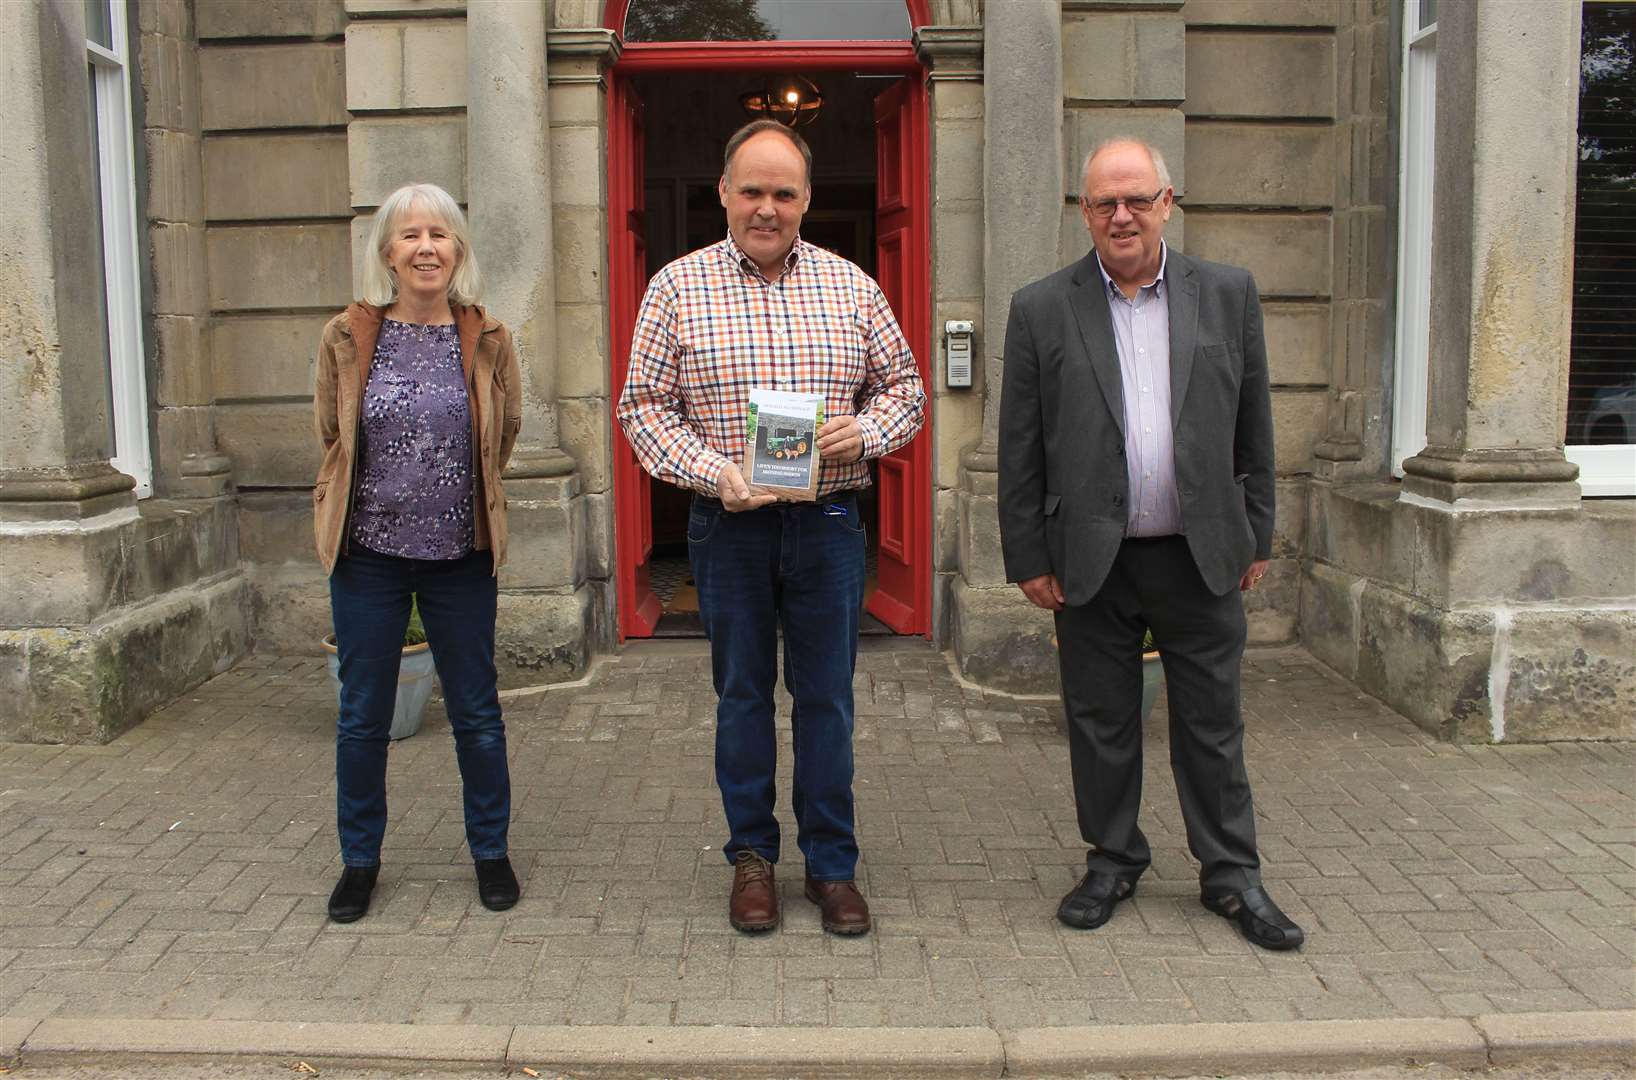 Donald MacDonald (centre) with Chris Nicolson and Ian Leith outside the Manor House hotel in Thurso where Life’s Too Short for Ironing Shirts was launched on Saturday. Picture: Alan Hendry